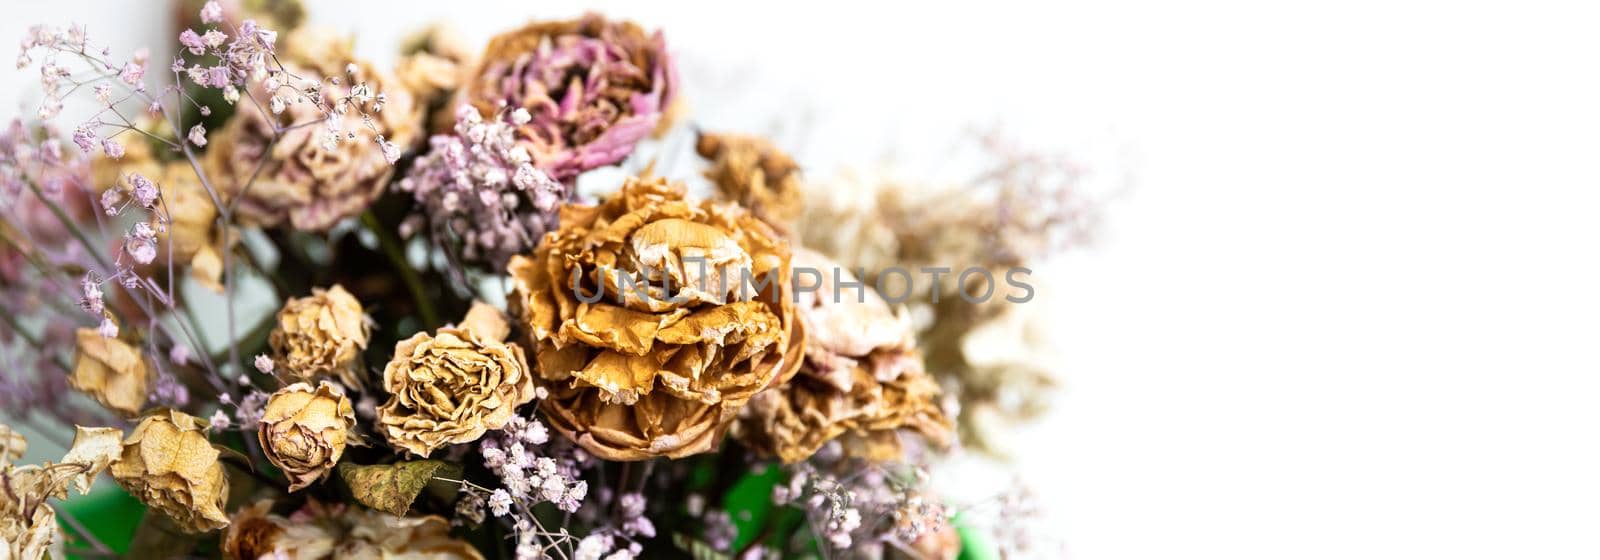 Dry bouquet with copy space. Close-up image of dried flowers in a bouquet. Life and death concept. Withered flower background